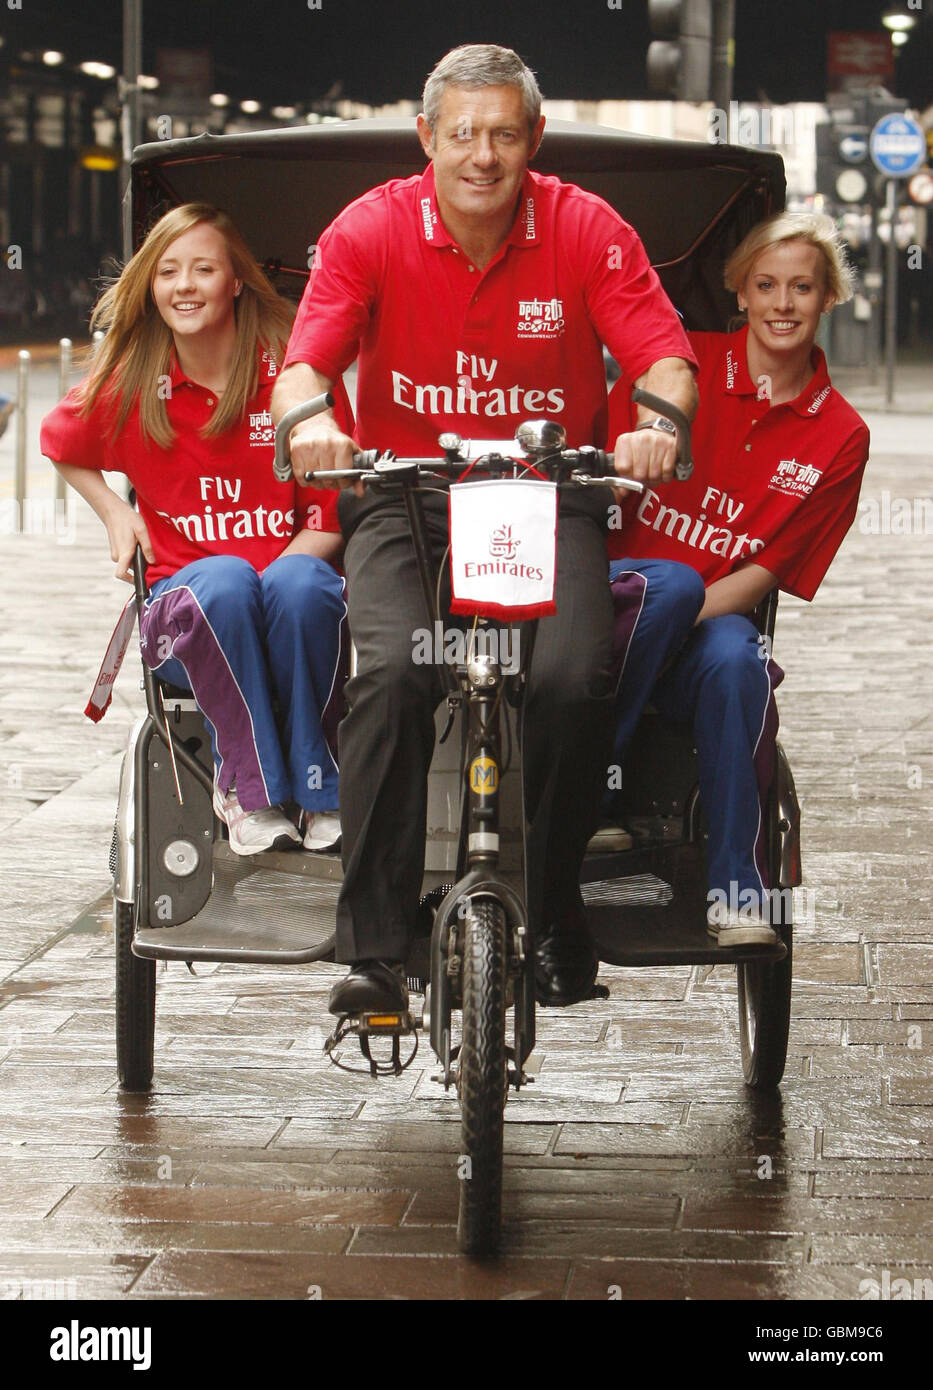 Rugby star and Commonwealth Ambassador Gavin Hastings with Commonwealth Youth Games medal winners Robyn Mathews (left) and Lynsey Sharp (right), on a tuck tuck (rickshaw) on Argyle Street in Glasgow, to promote the announcement of Emirates Airline as a sponsor for the Scottish Commonwealth Games team. Stock Photo